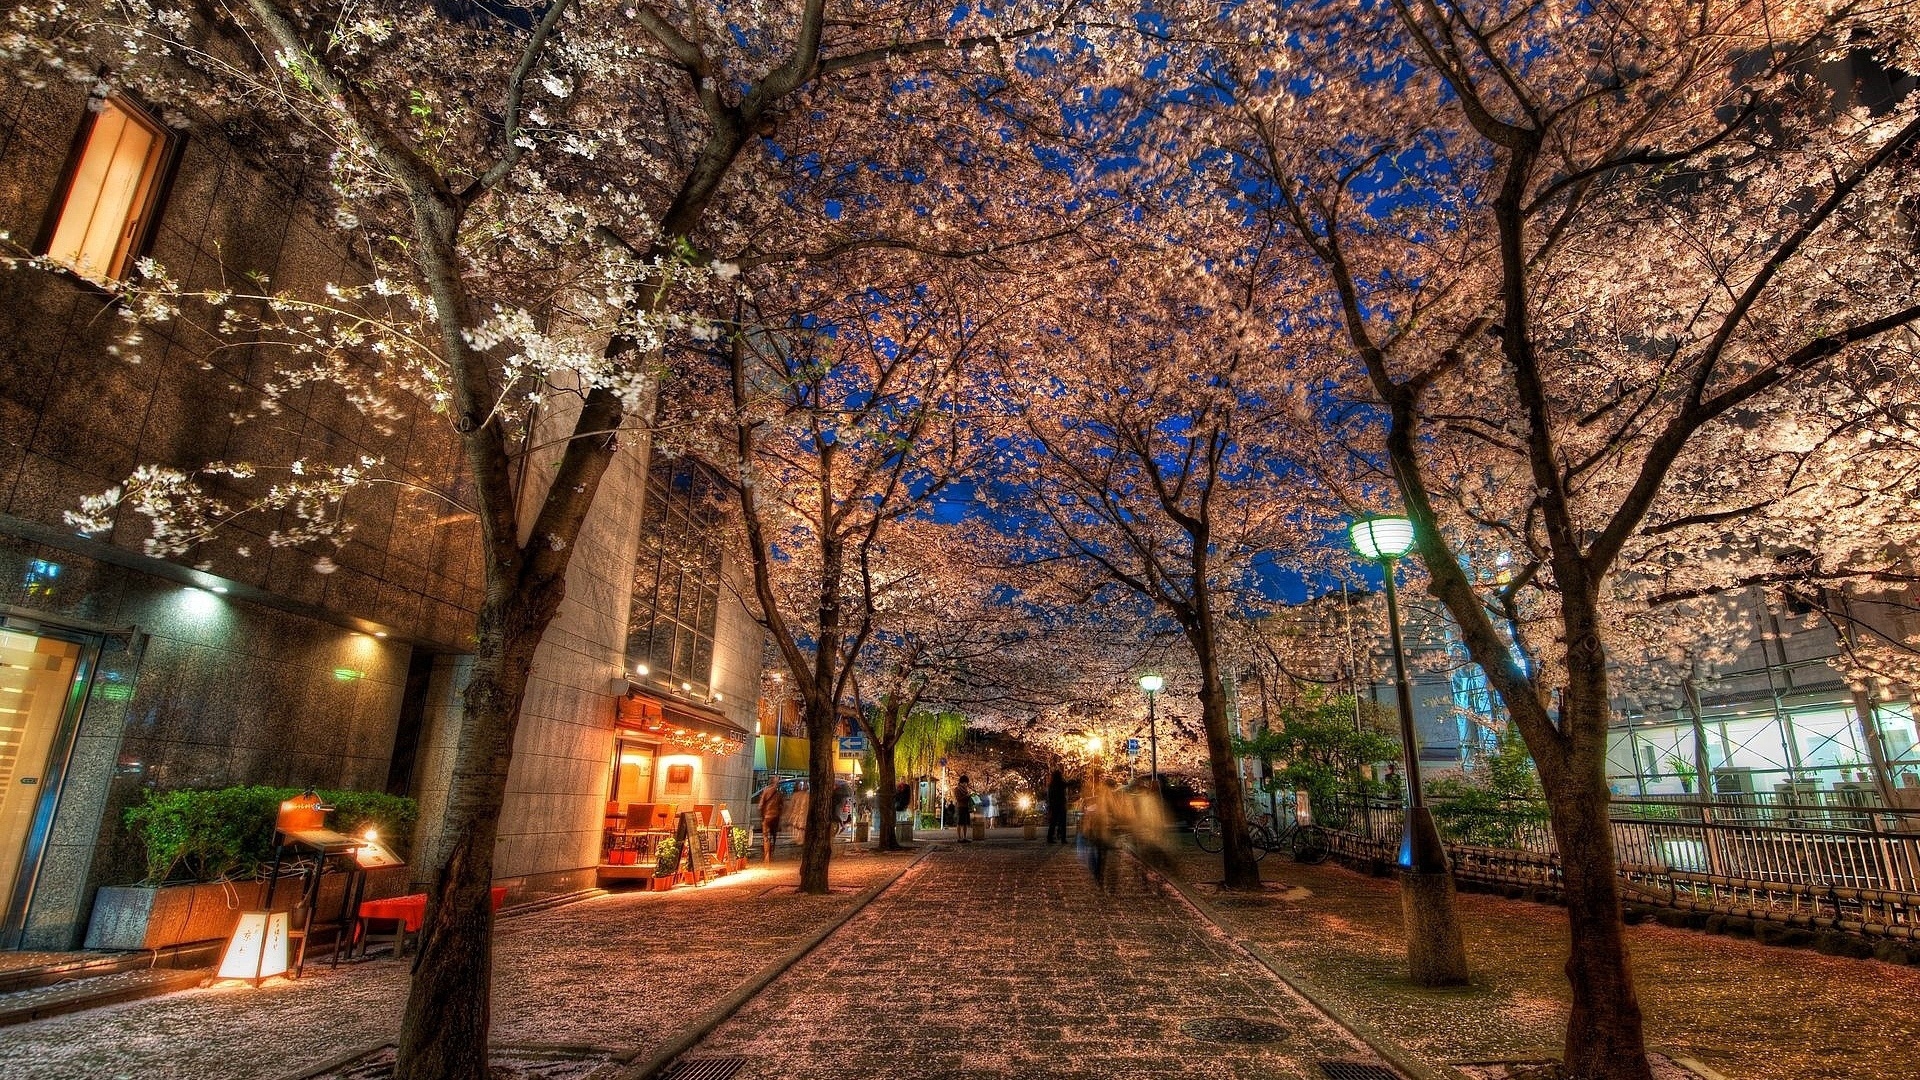 Download wallpaper 1920x1080 city, alley, trees, night, park, hdr